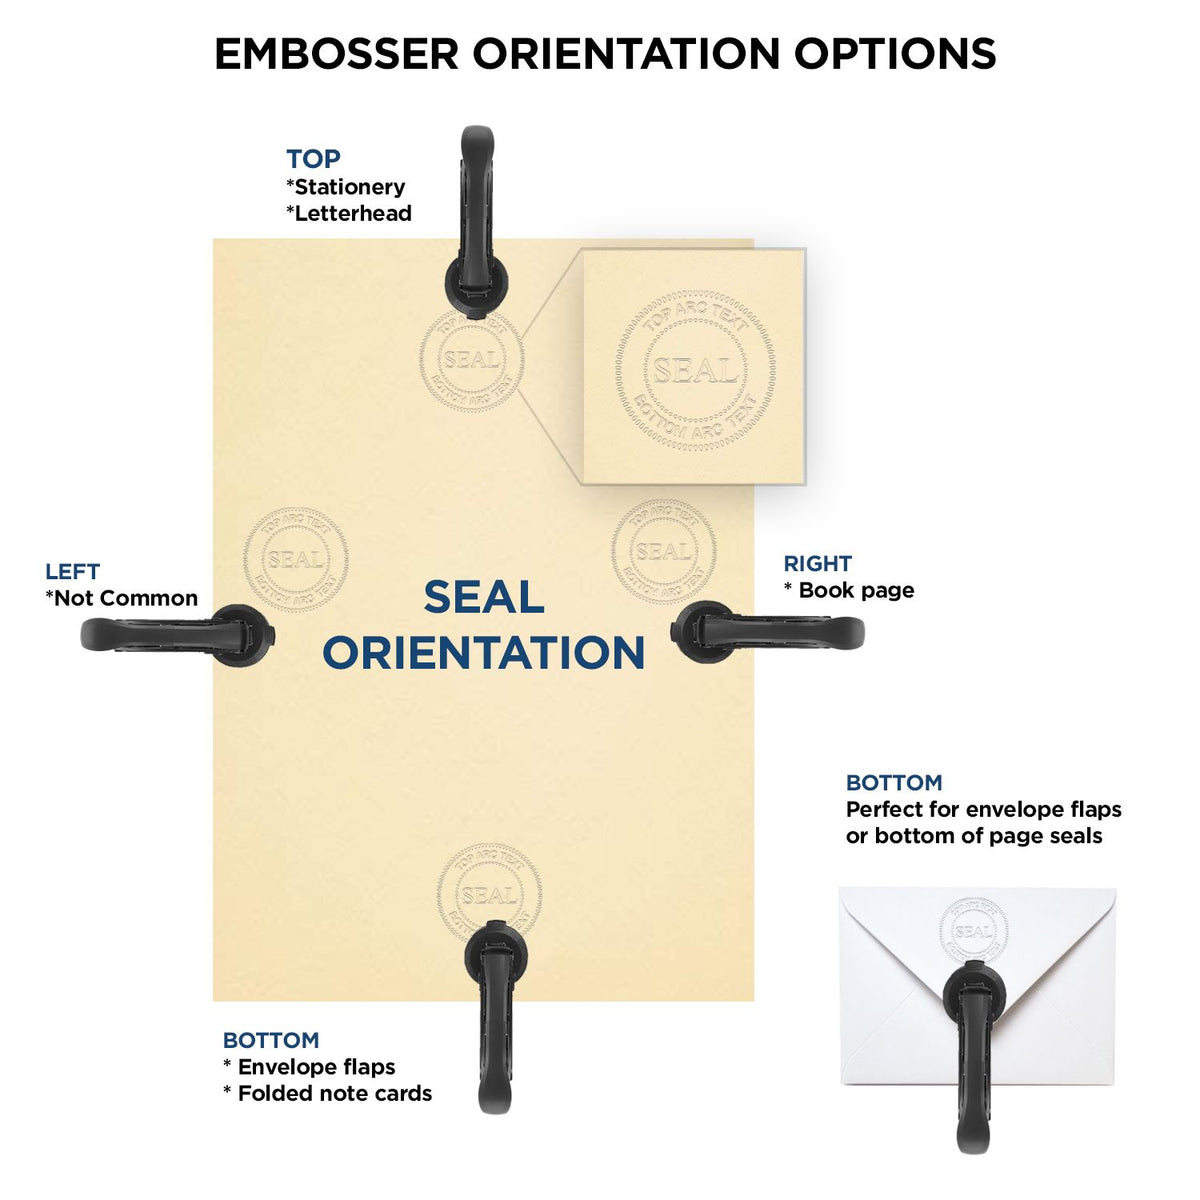 An infographic for the State of Michigan Soft Land Surveyor Embossing Seal showing embosser orientation, this is showing examples of a top, bottom, right and left insert.